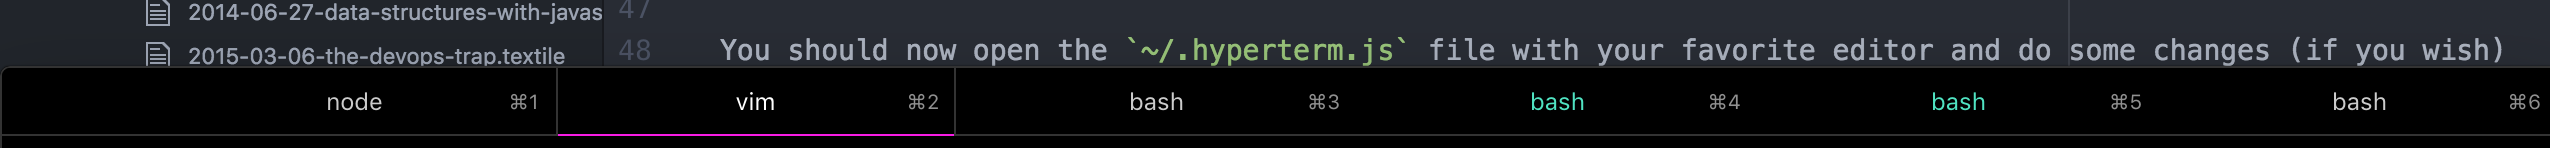 Hyperterm Tabs with the plugins installed